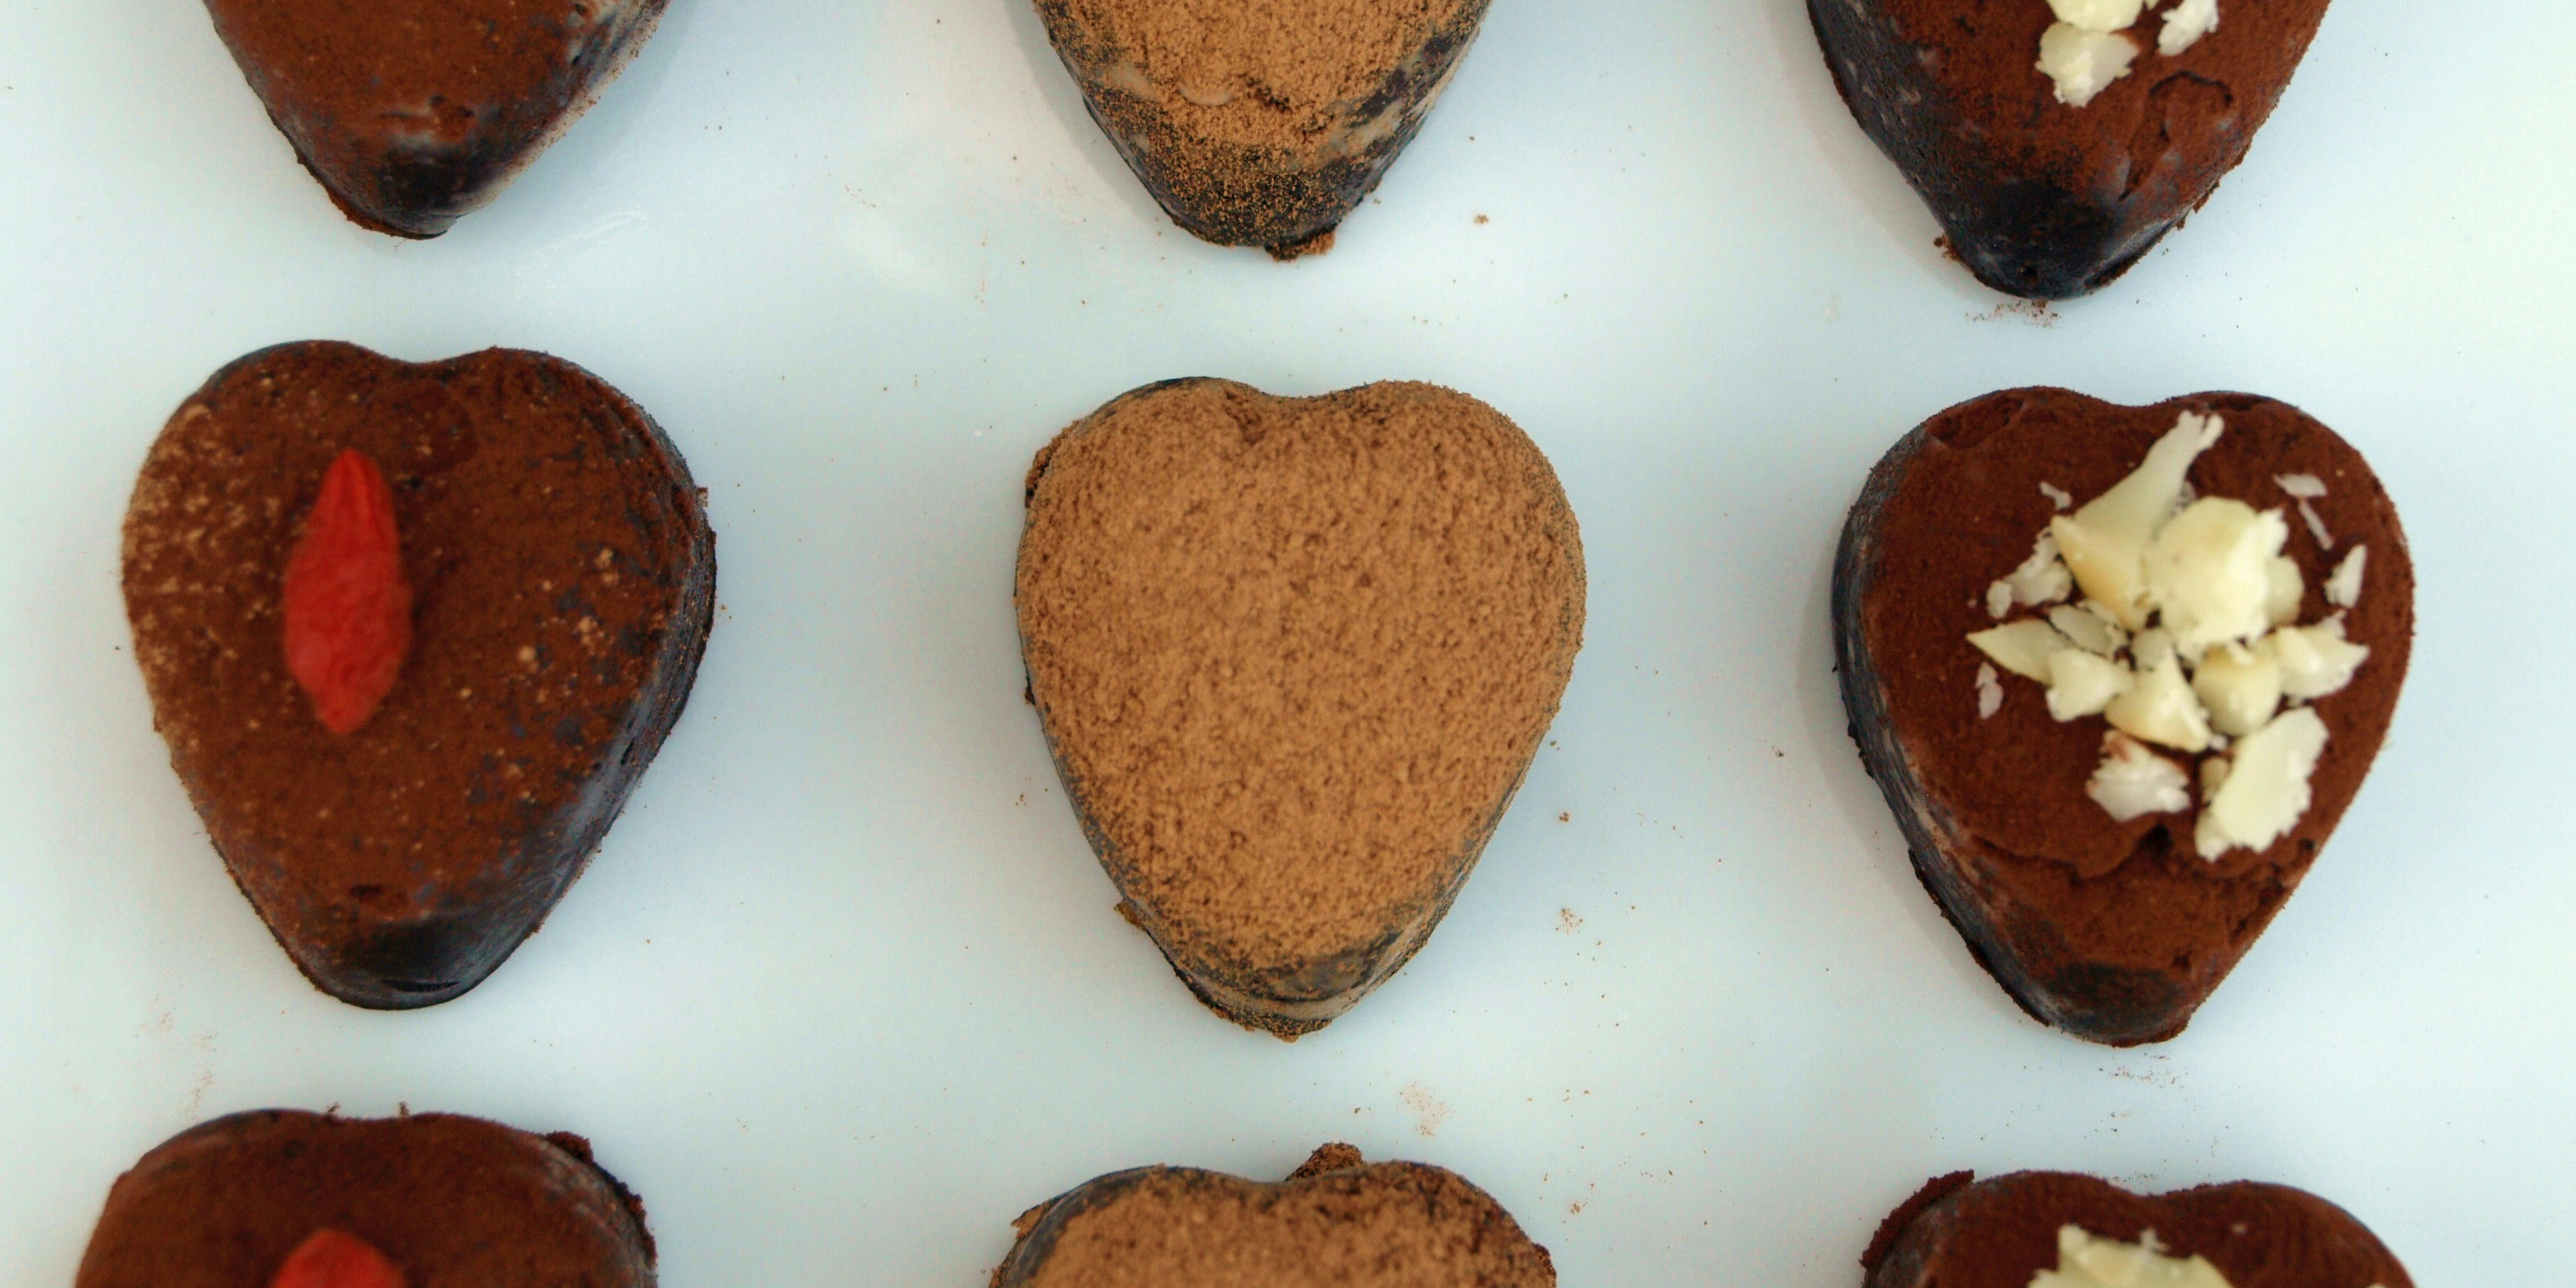 Heart-shaped chocolate deserts are laid out neatly in rows. Some are topped with chopped nutes, and others with a piece of raspberry.